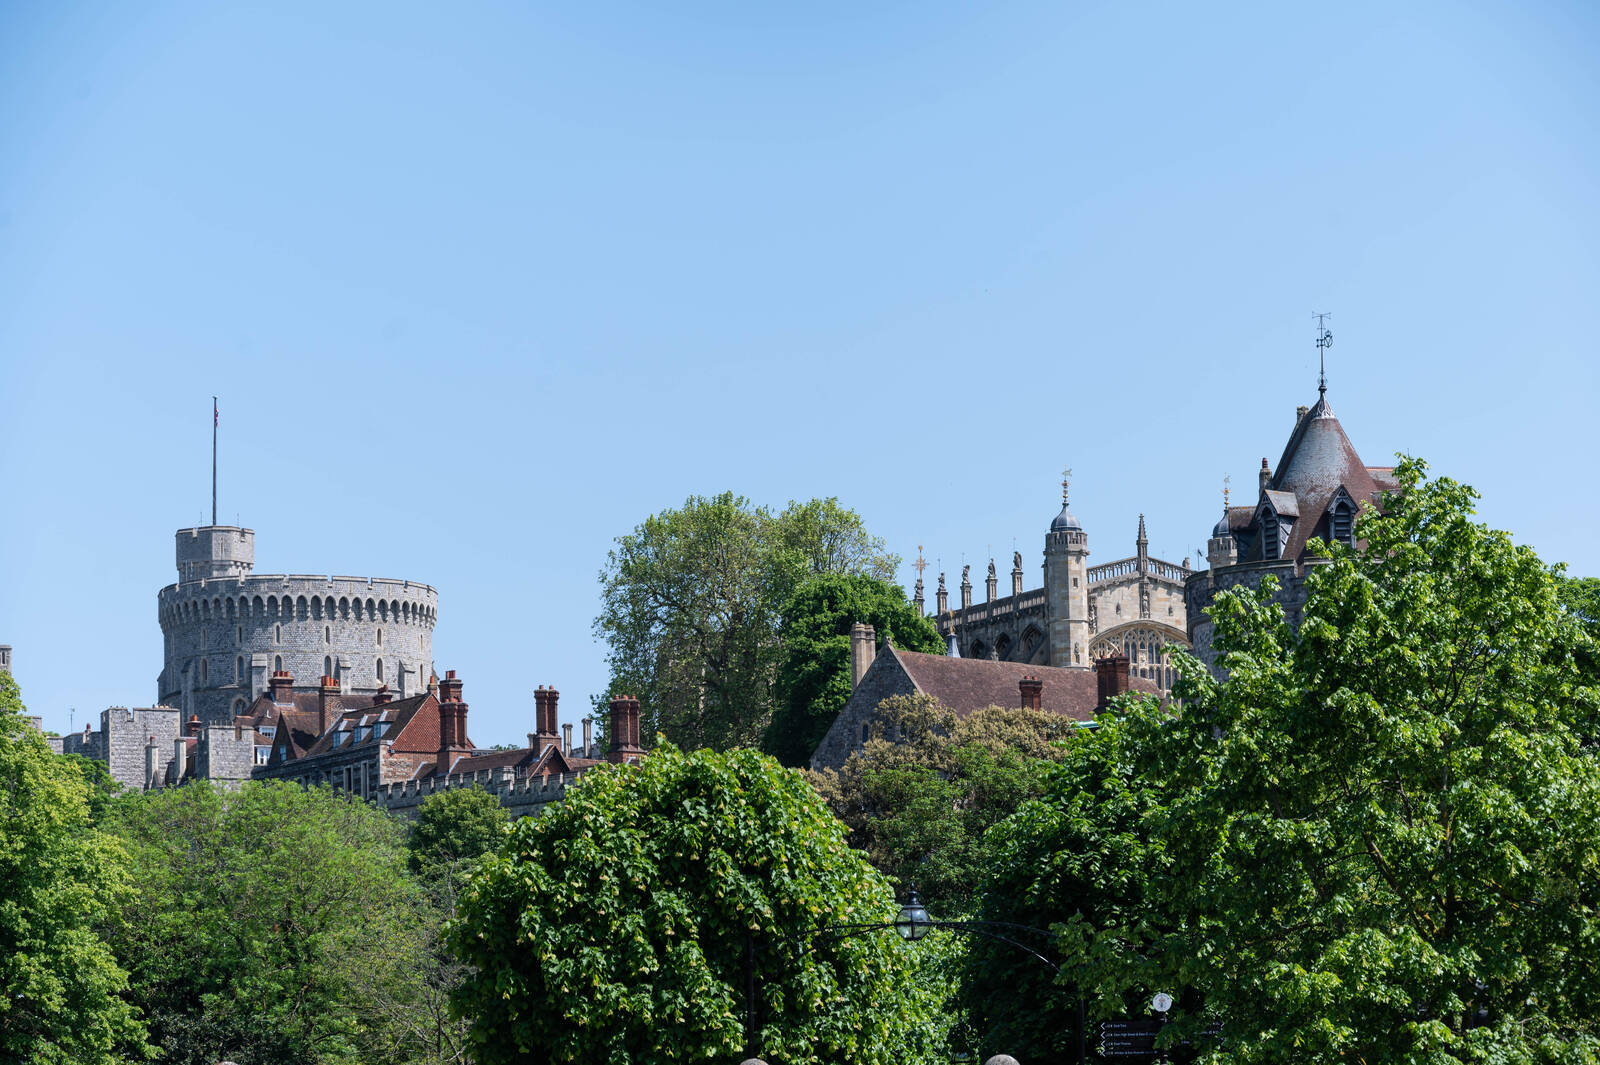 Image of View of Windsor Castle from Alexandra Gardens by Jules Renahan